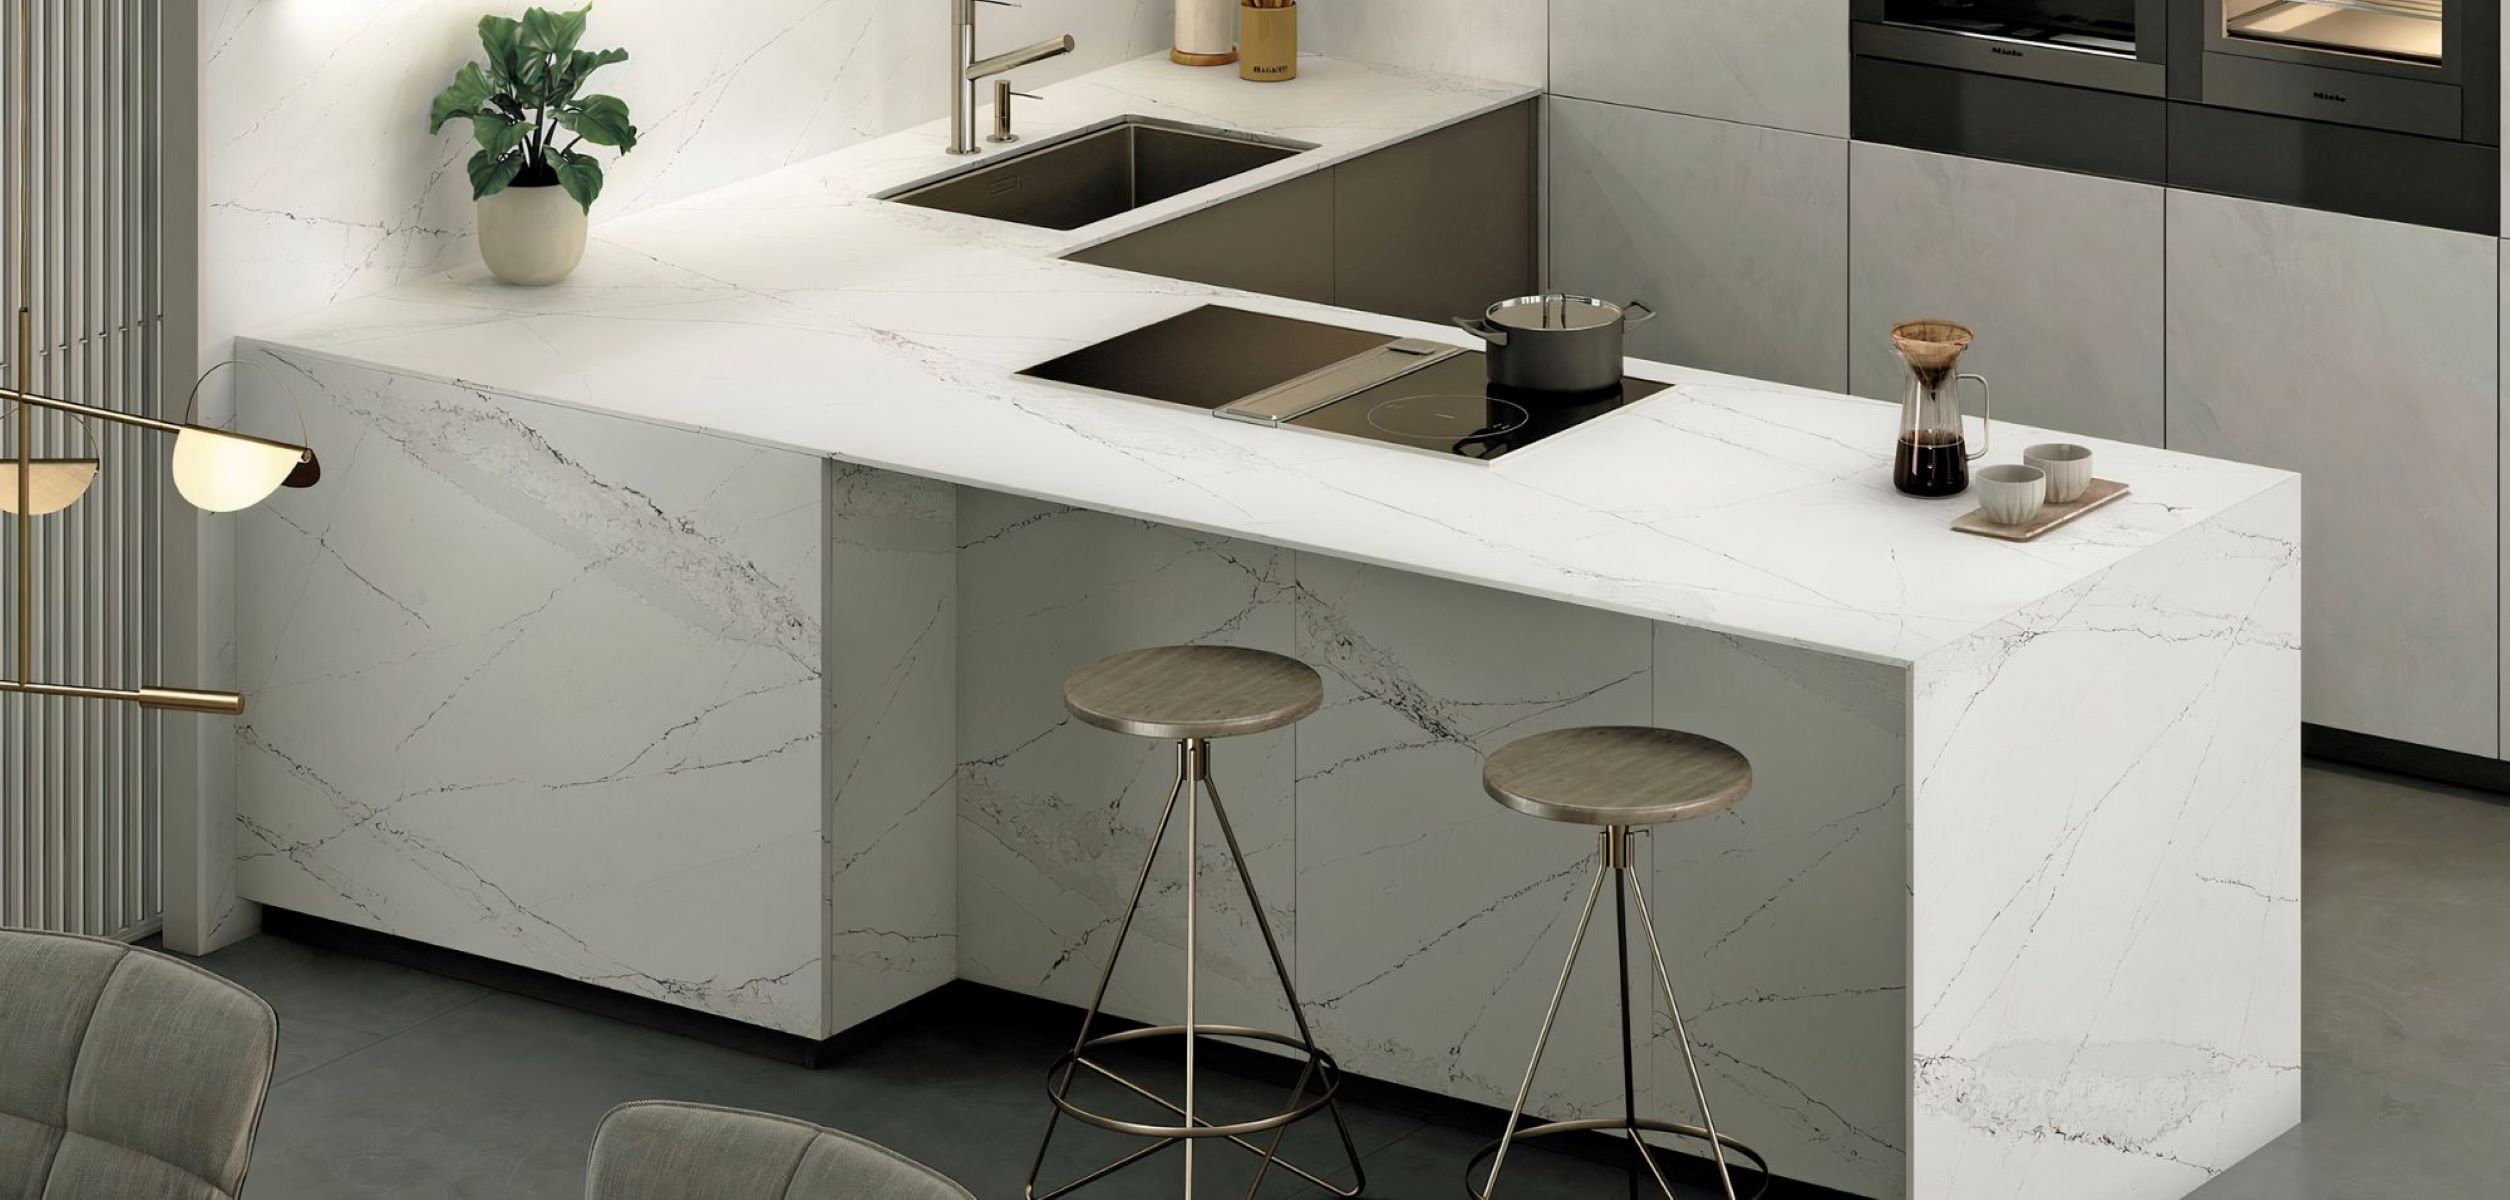 What Is Silestone Countertops Made Of